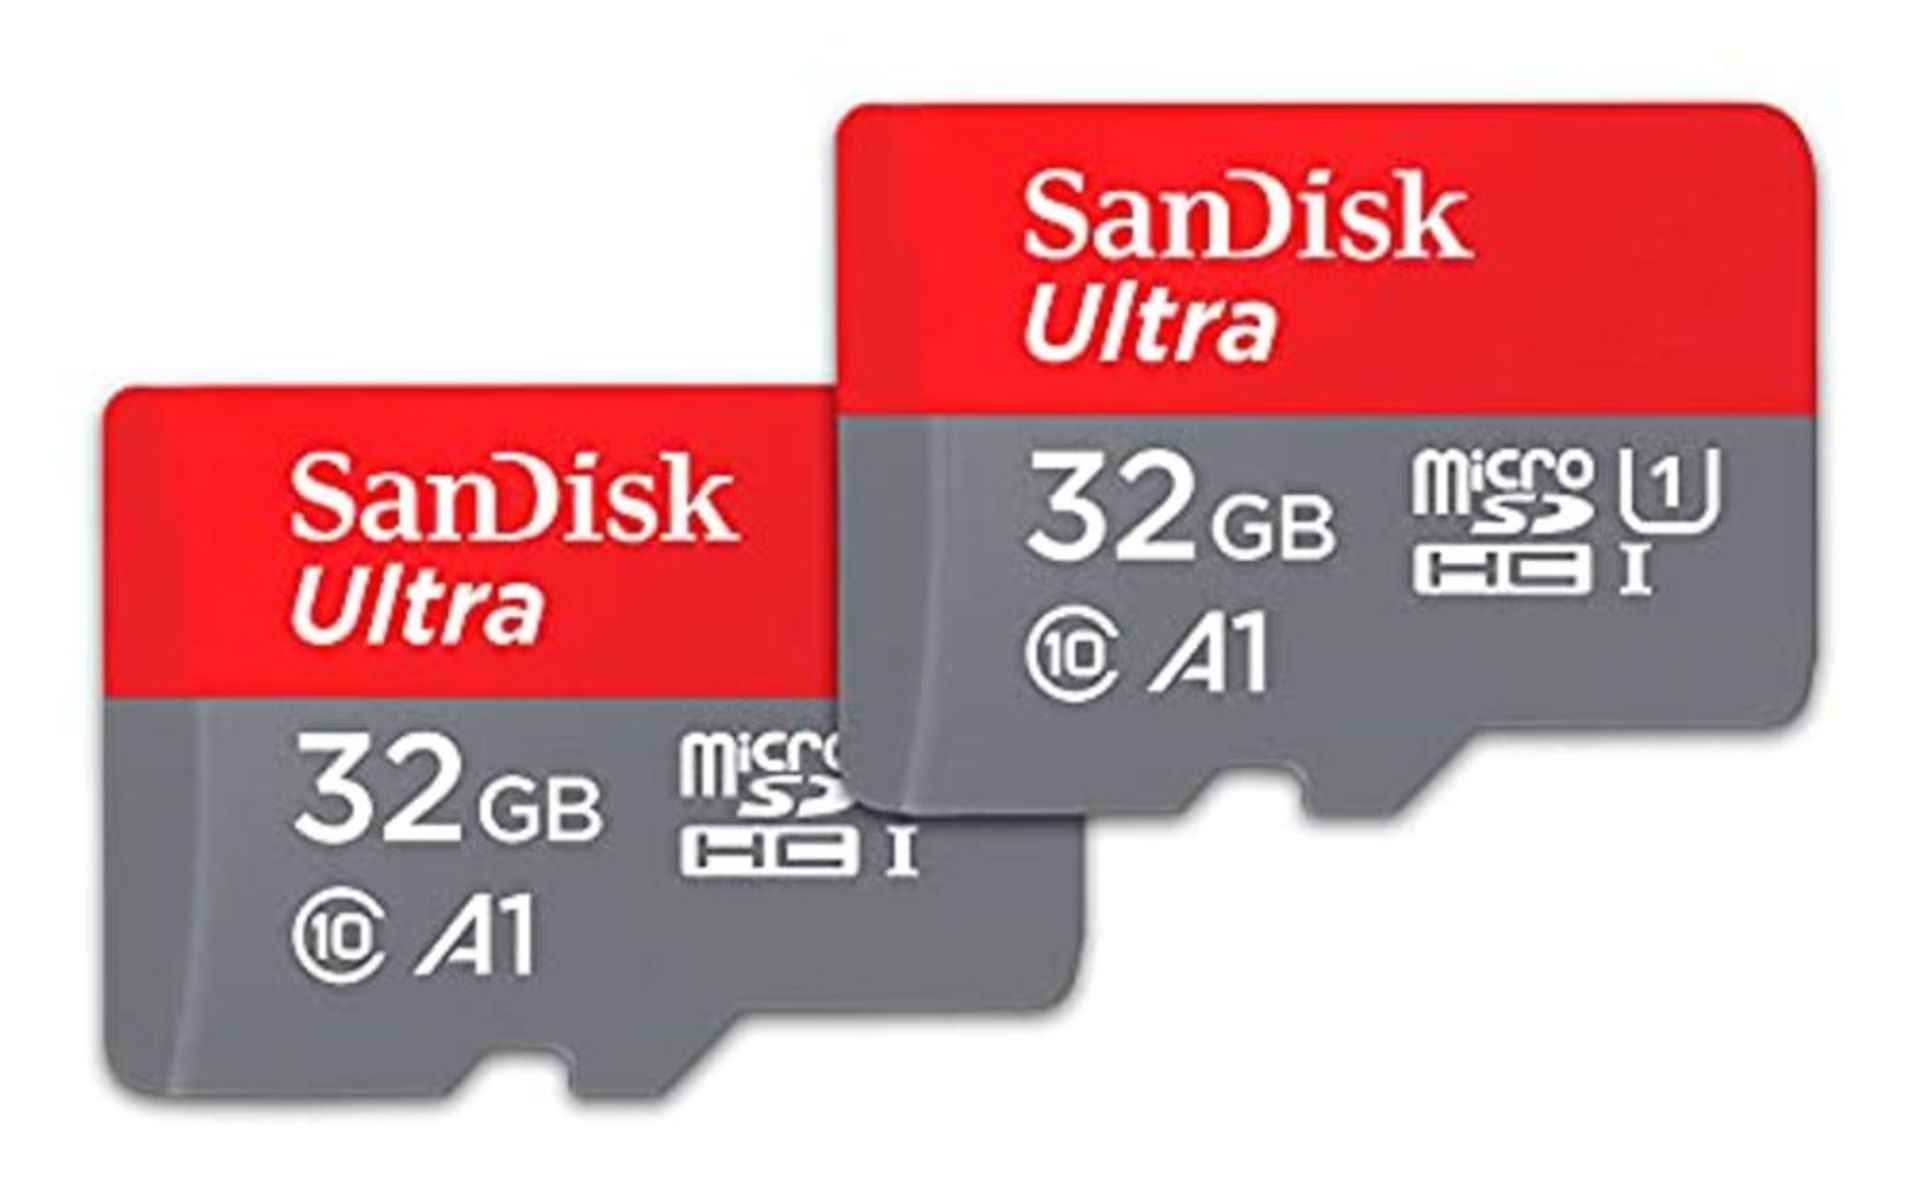 SanDisk Ultra 32 GB microSDHC Memory Card SD Adapter with A1 App Performance Up to 1